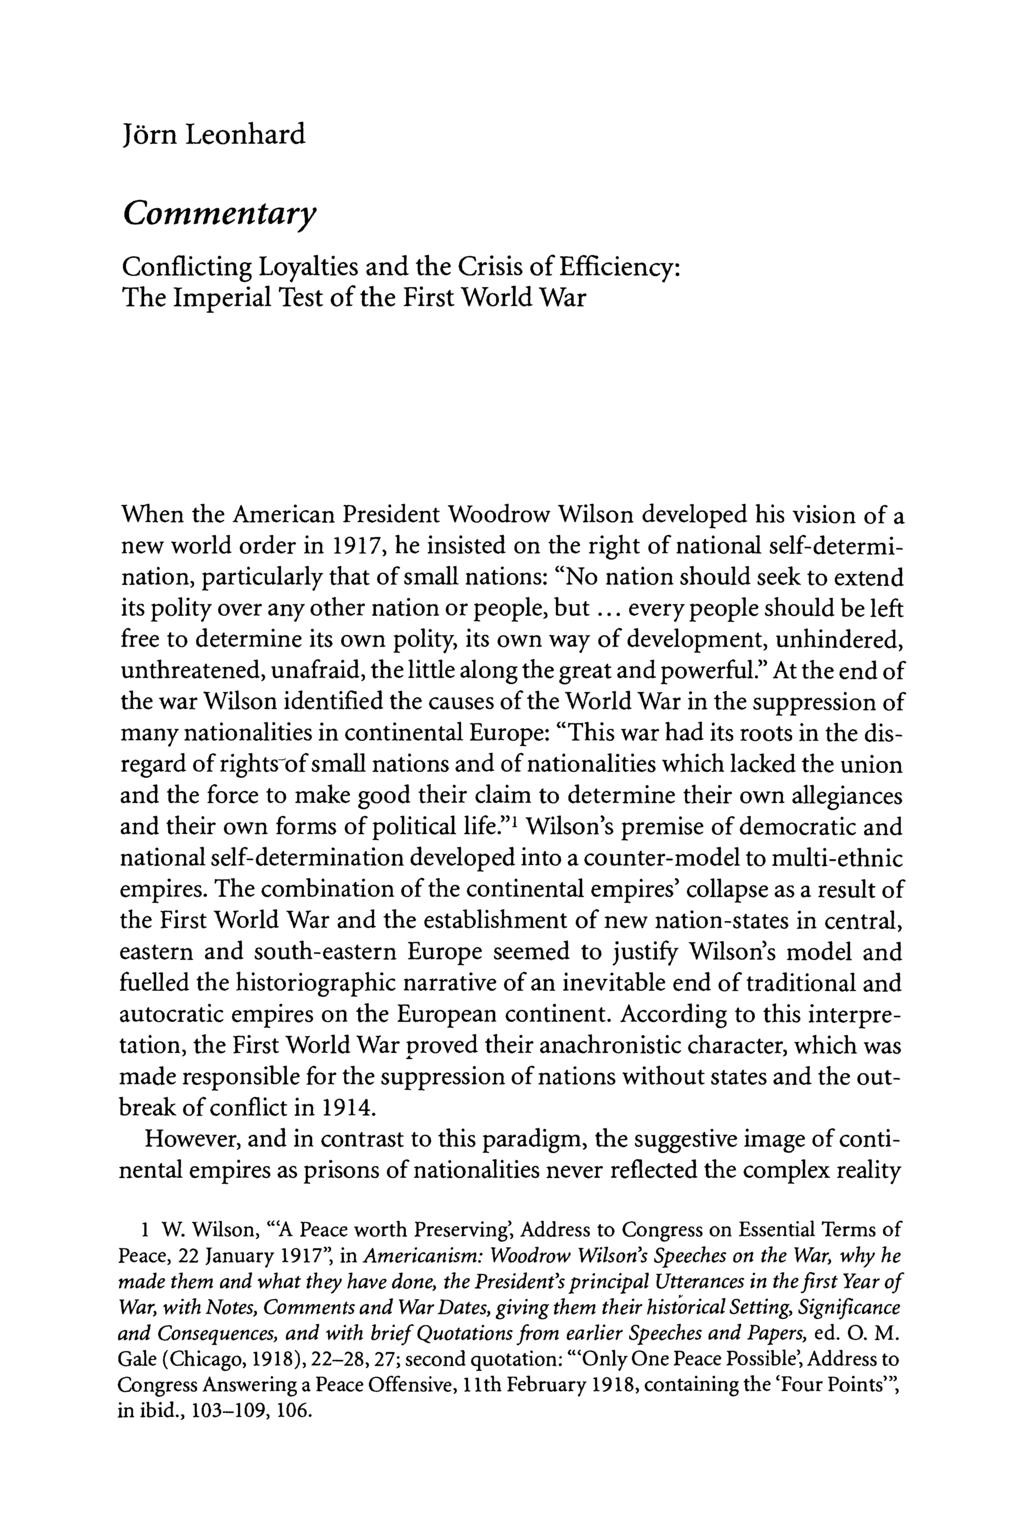 Jörn Leonhard Commentary Conflicting Loyalties and the Crisis of Efficiency: The Imperial Test of the First World War When the American President Woodrow Wilson developed his vision of a new world